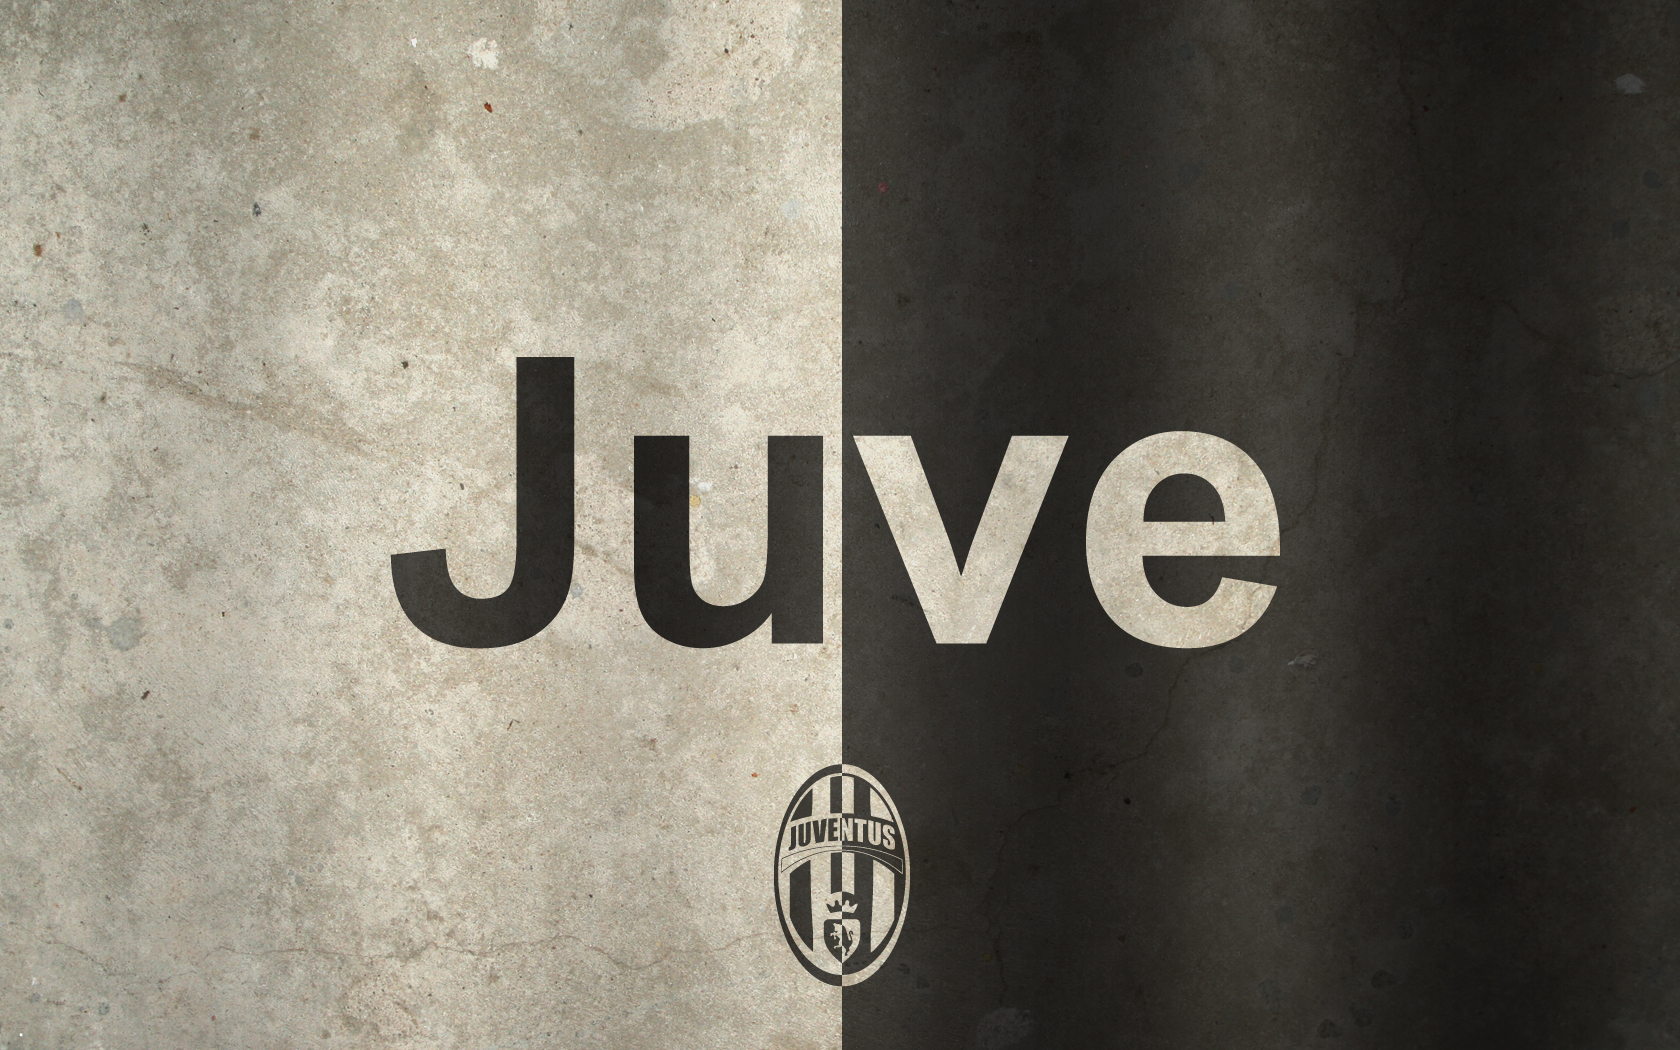 Juventus HD Wallpaper For Desktop iPhone iPad And Android